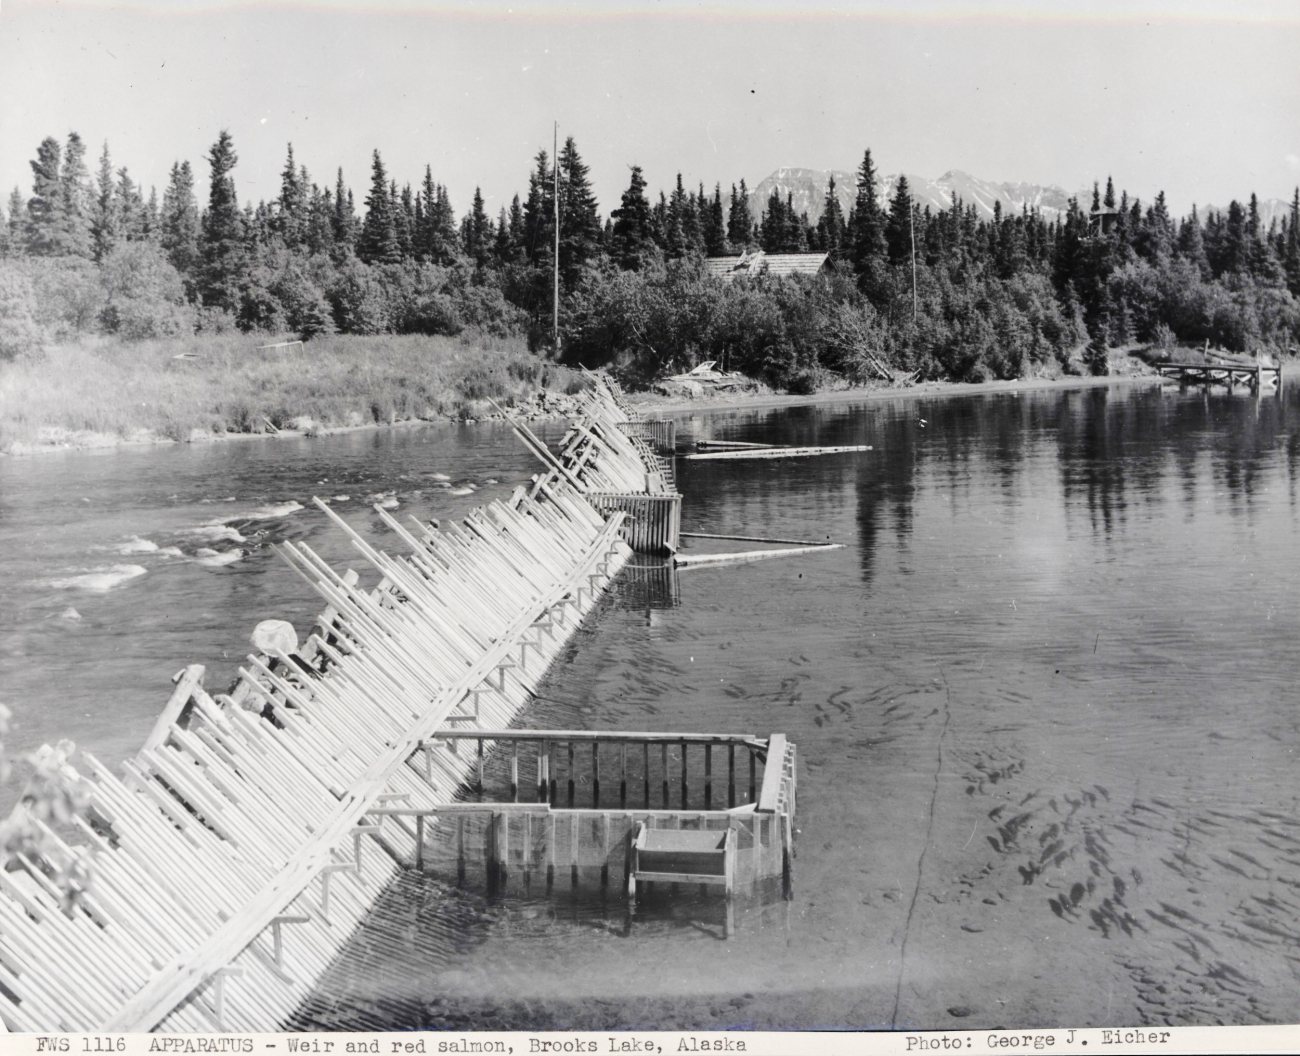 Fish weir and red salmon at Brooks Lake